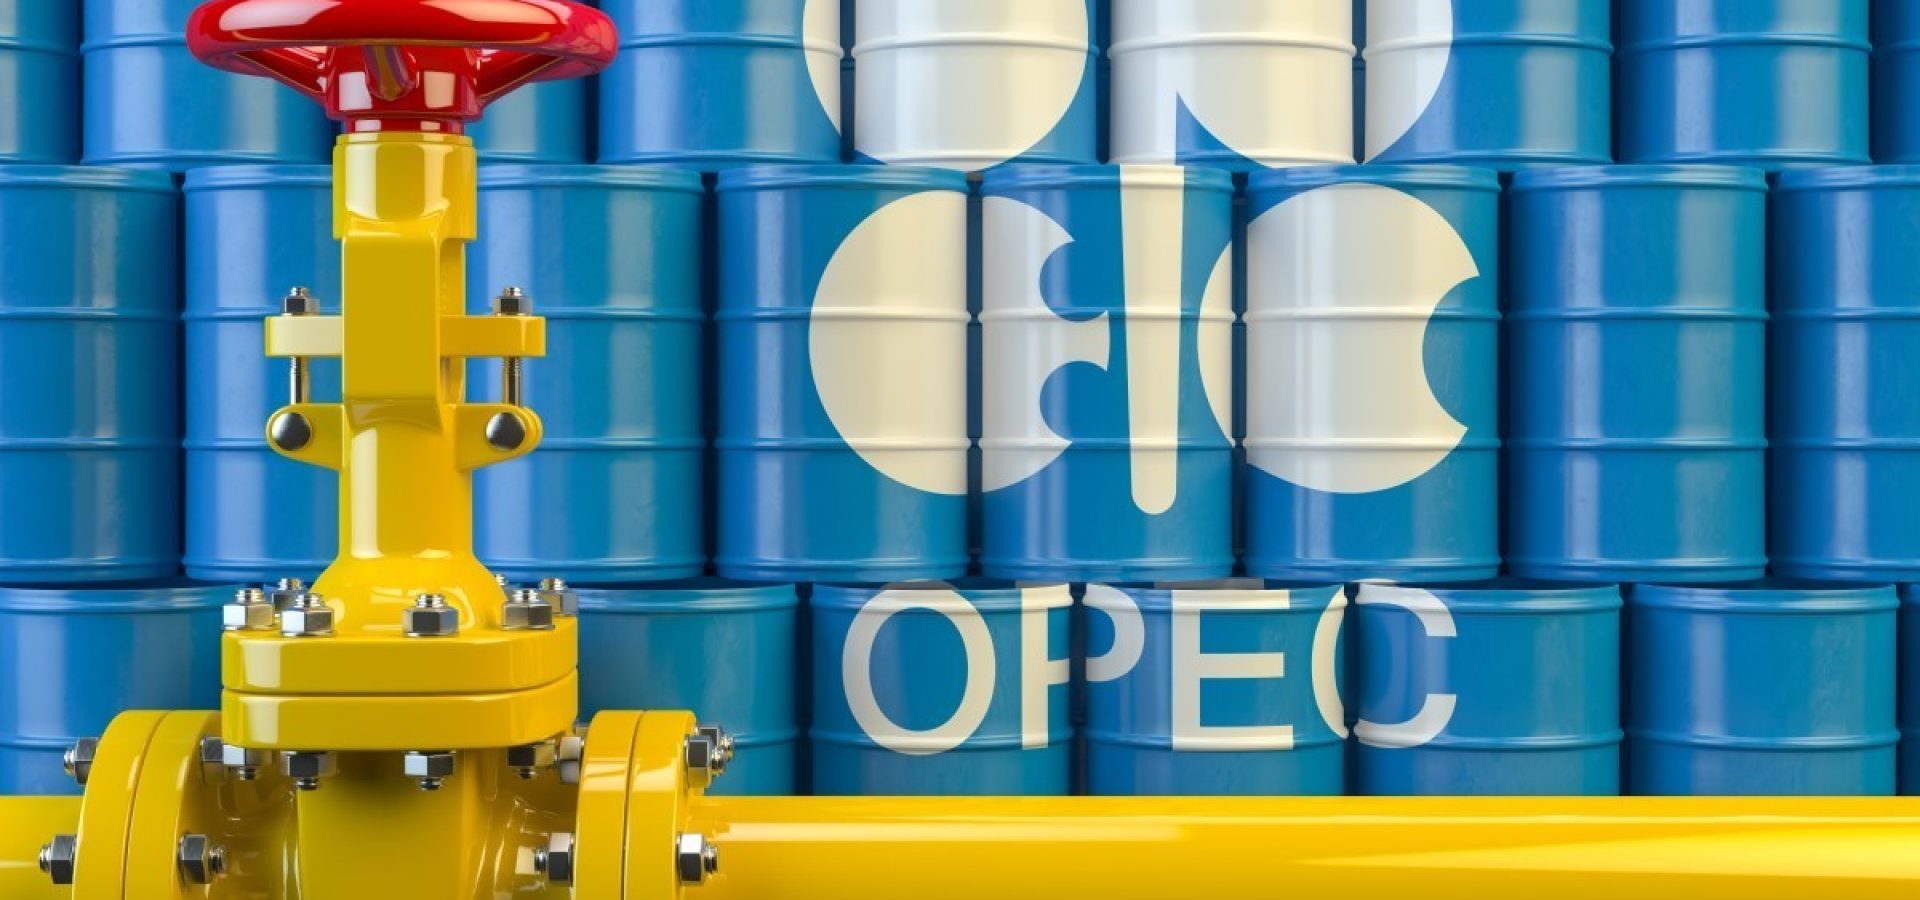 The role of OPEC in the modern world